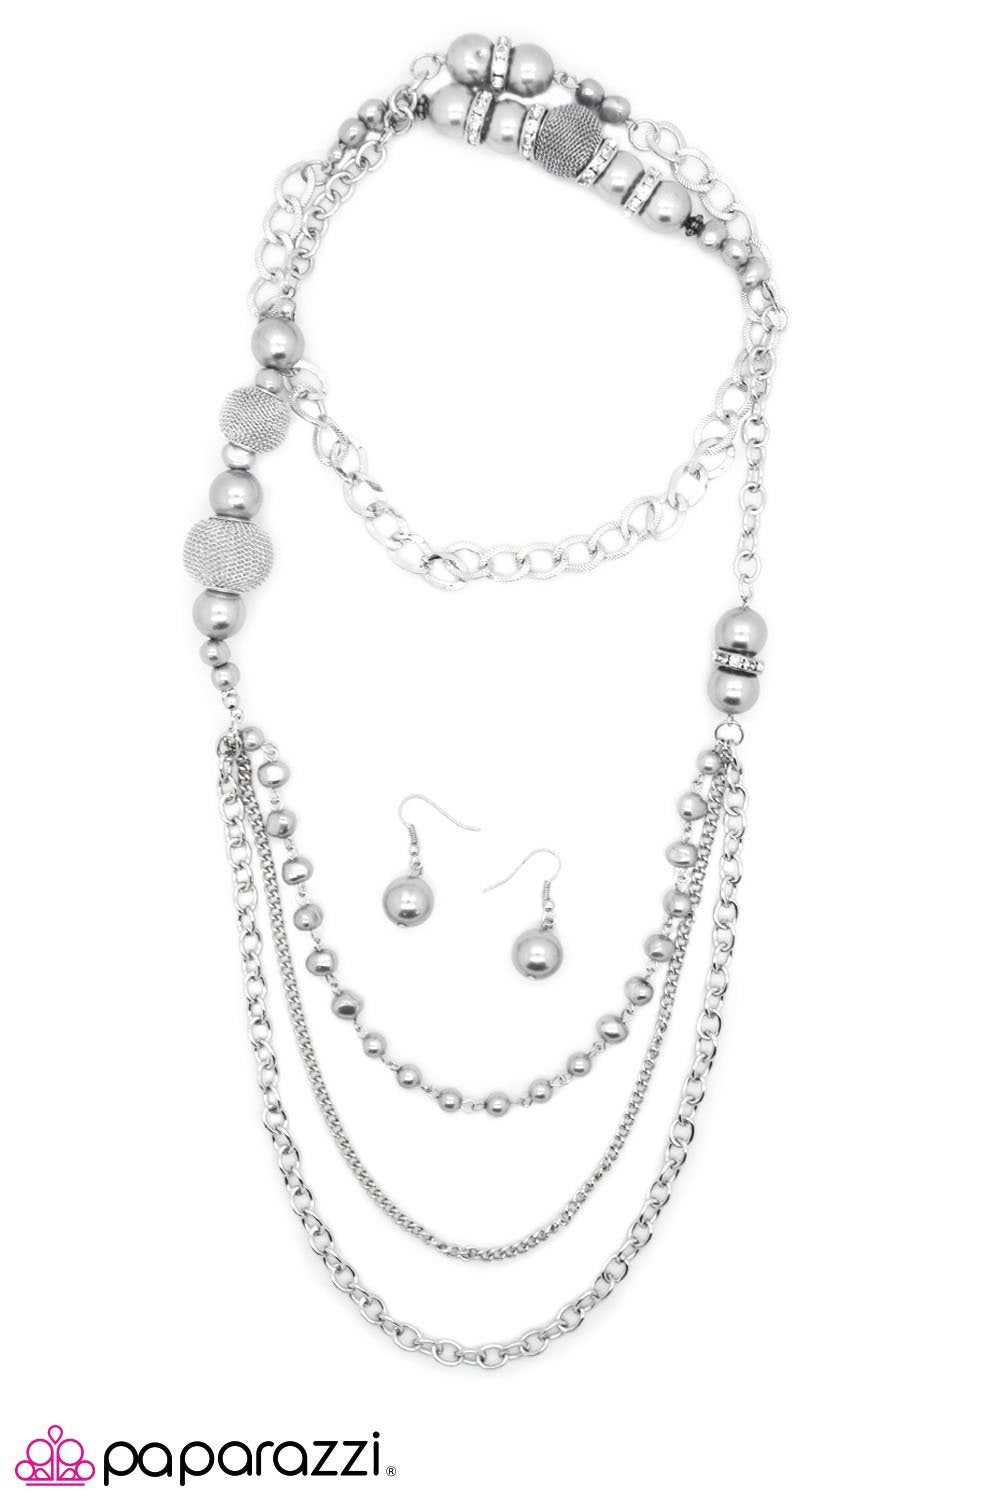 Enmeshed in Elegance Long Silver Necklace and matching Earrings - Paparazzi Accessories - lightbox -CarasShop.com - $5 Jewelry by Cara Jewels